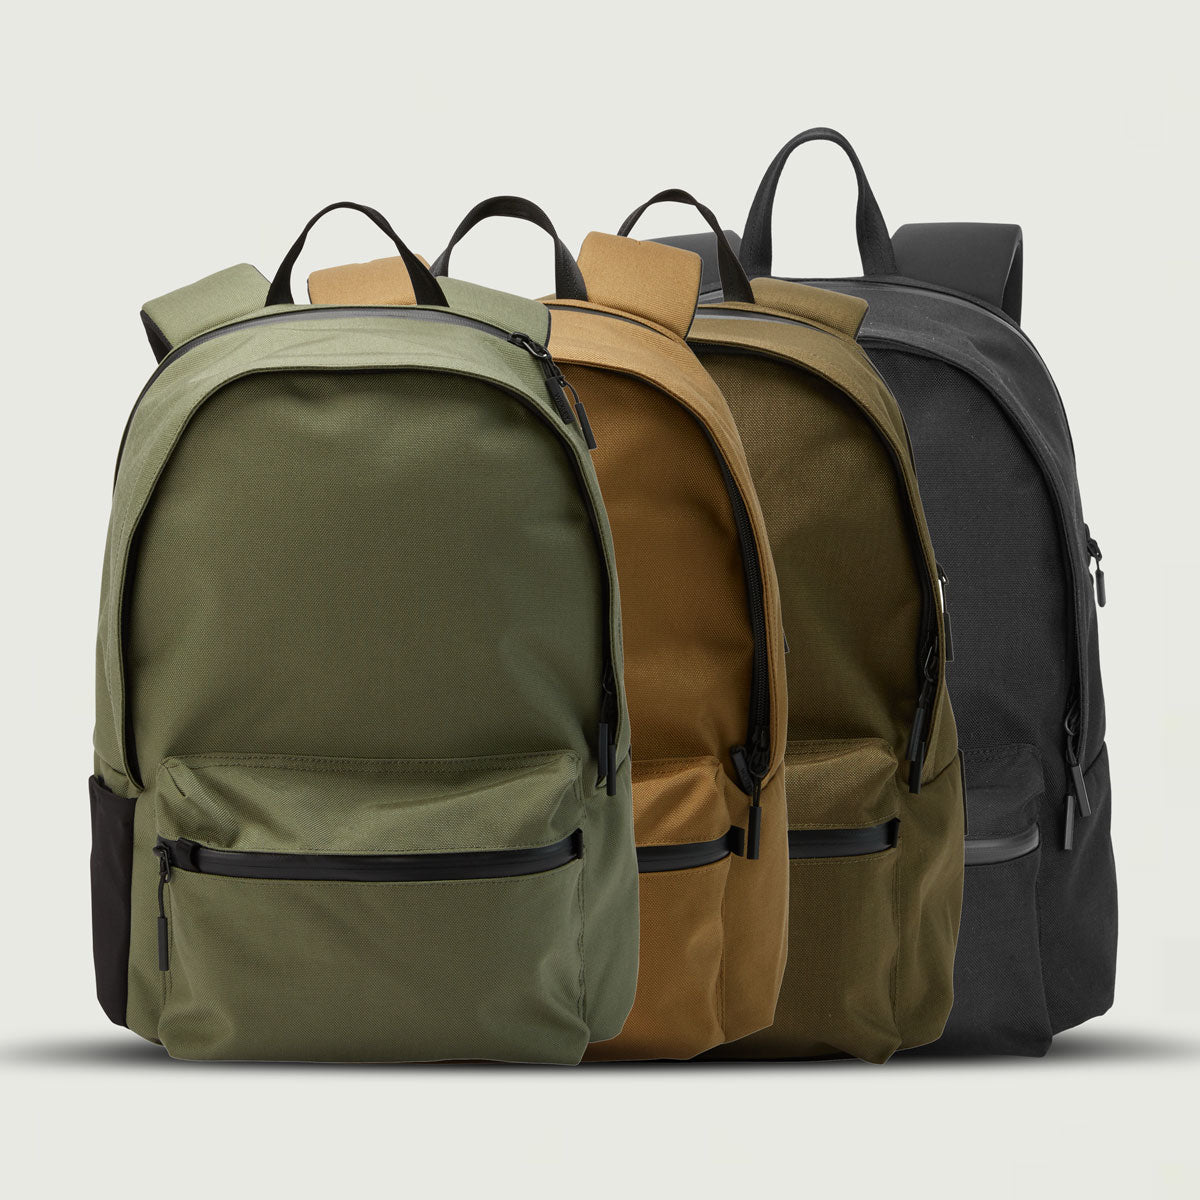 WEXLEY CLASSIC DAYPACK 18L